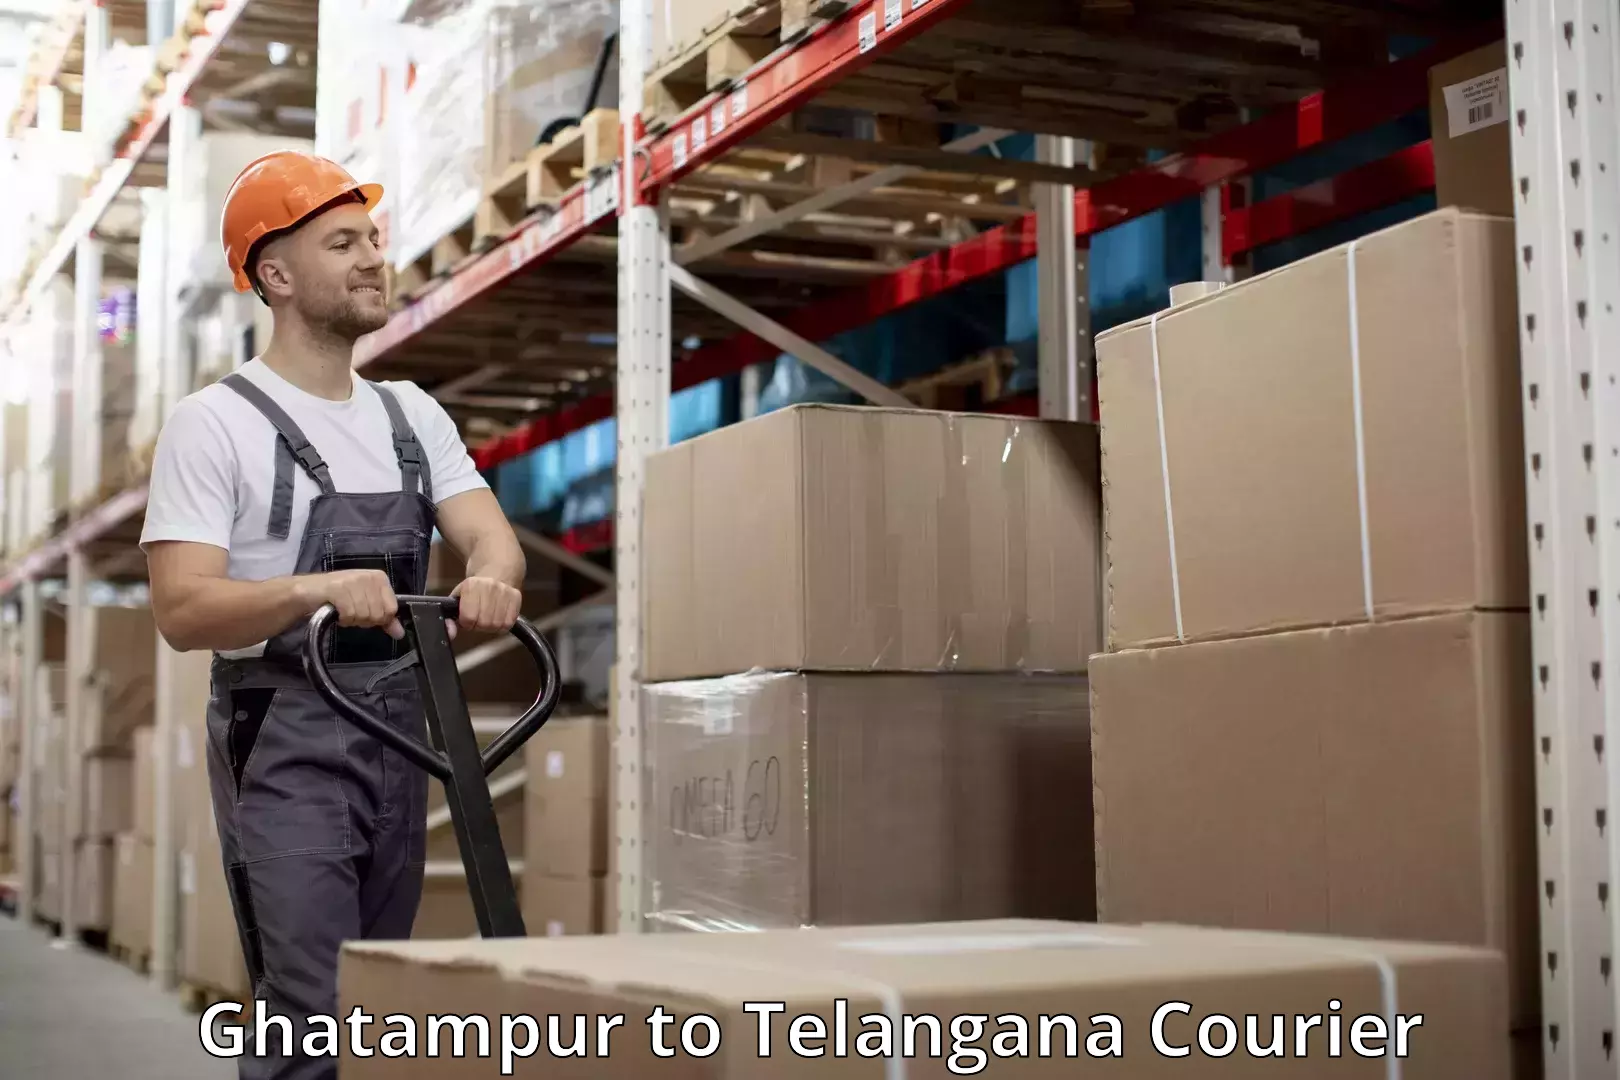 Luggage transport consulting Ghatampur to Telangana